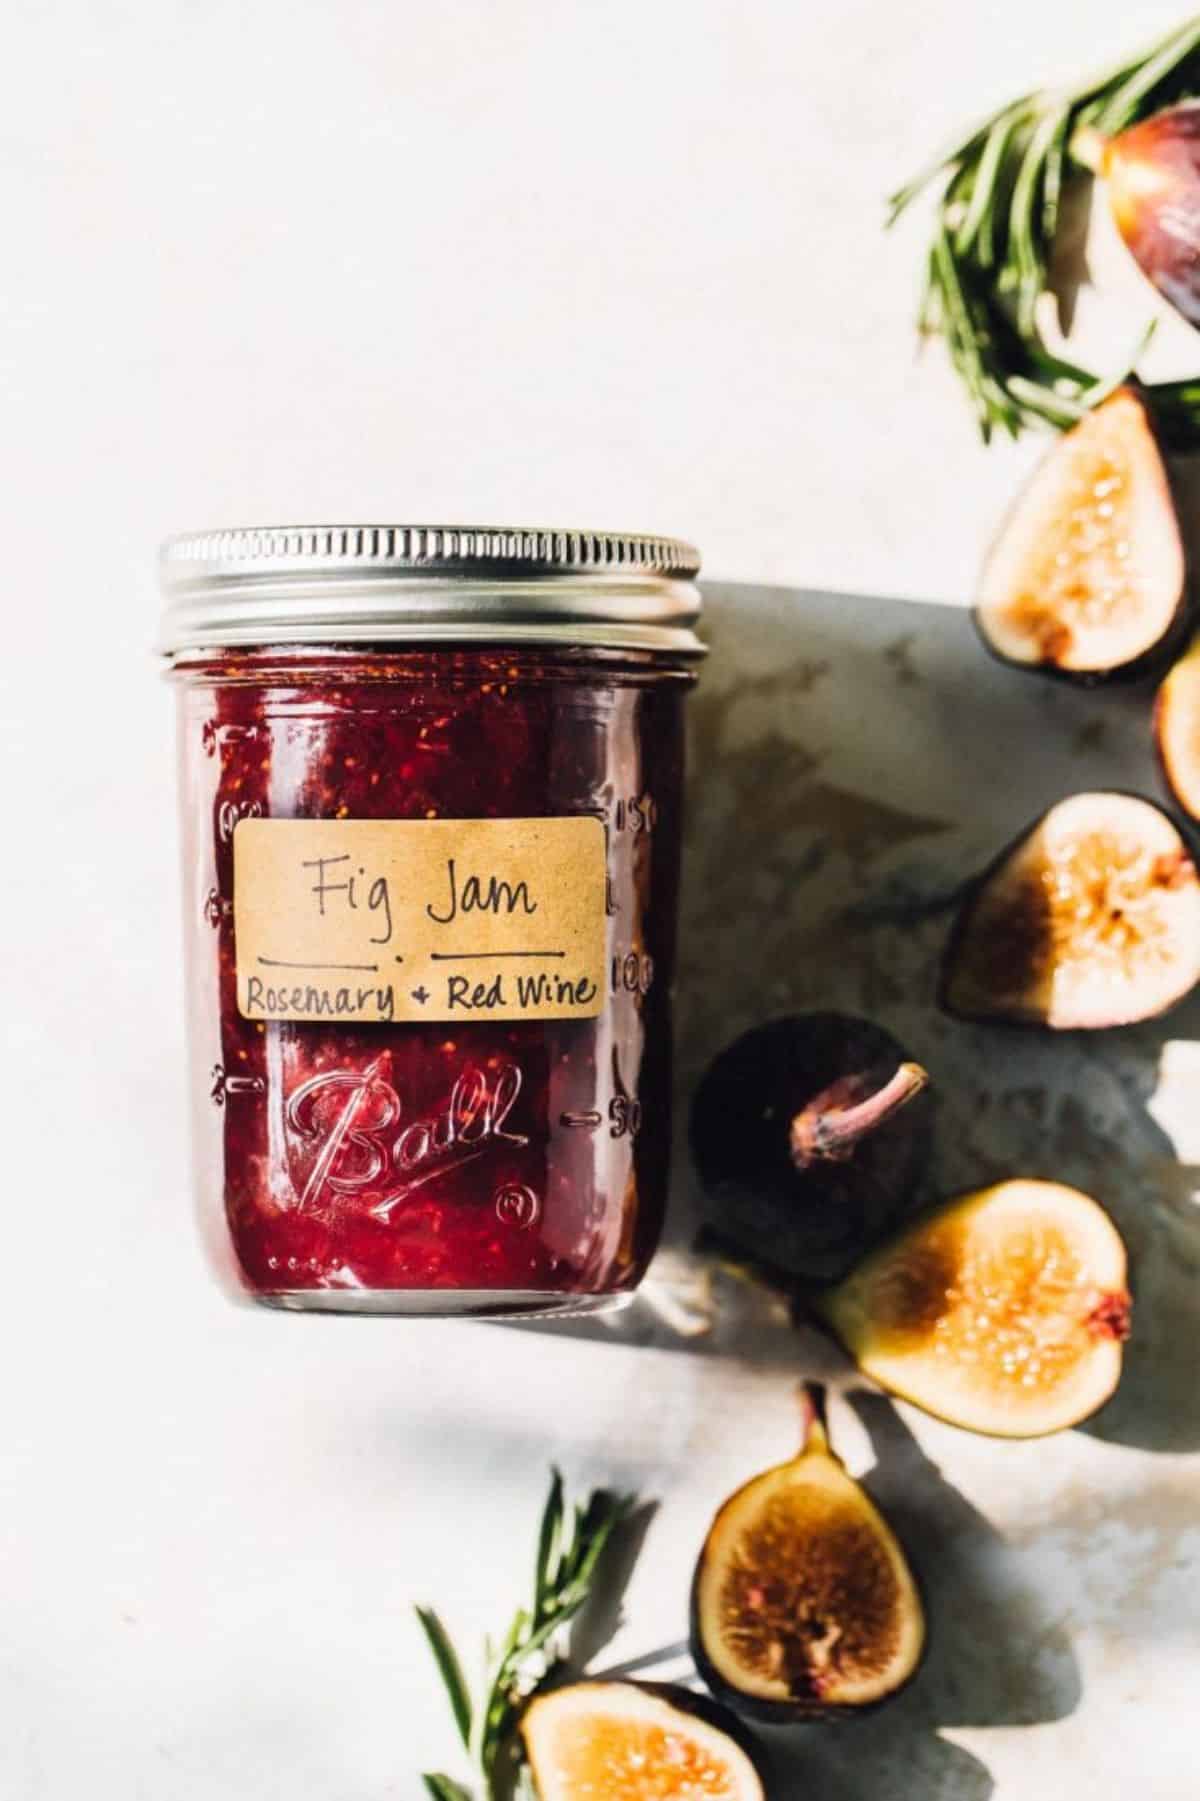 Red fig jam in a glass jar with sliced figs around.